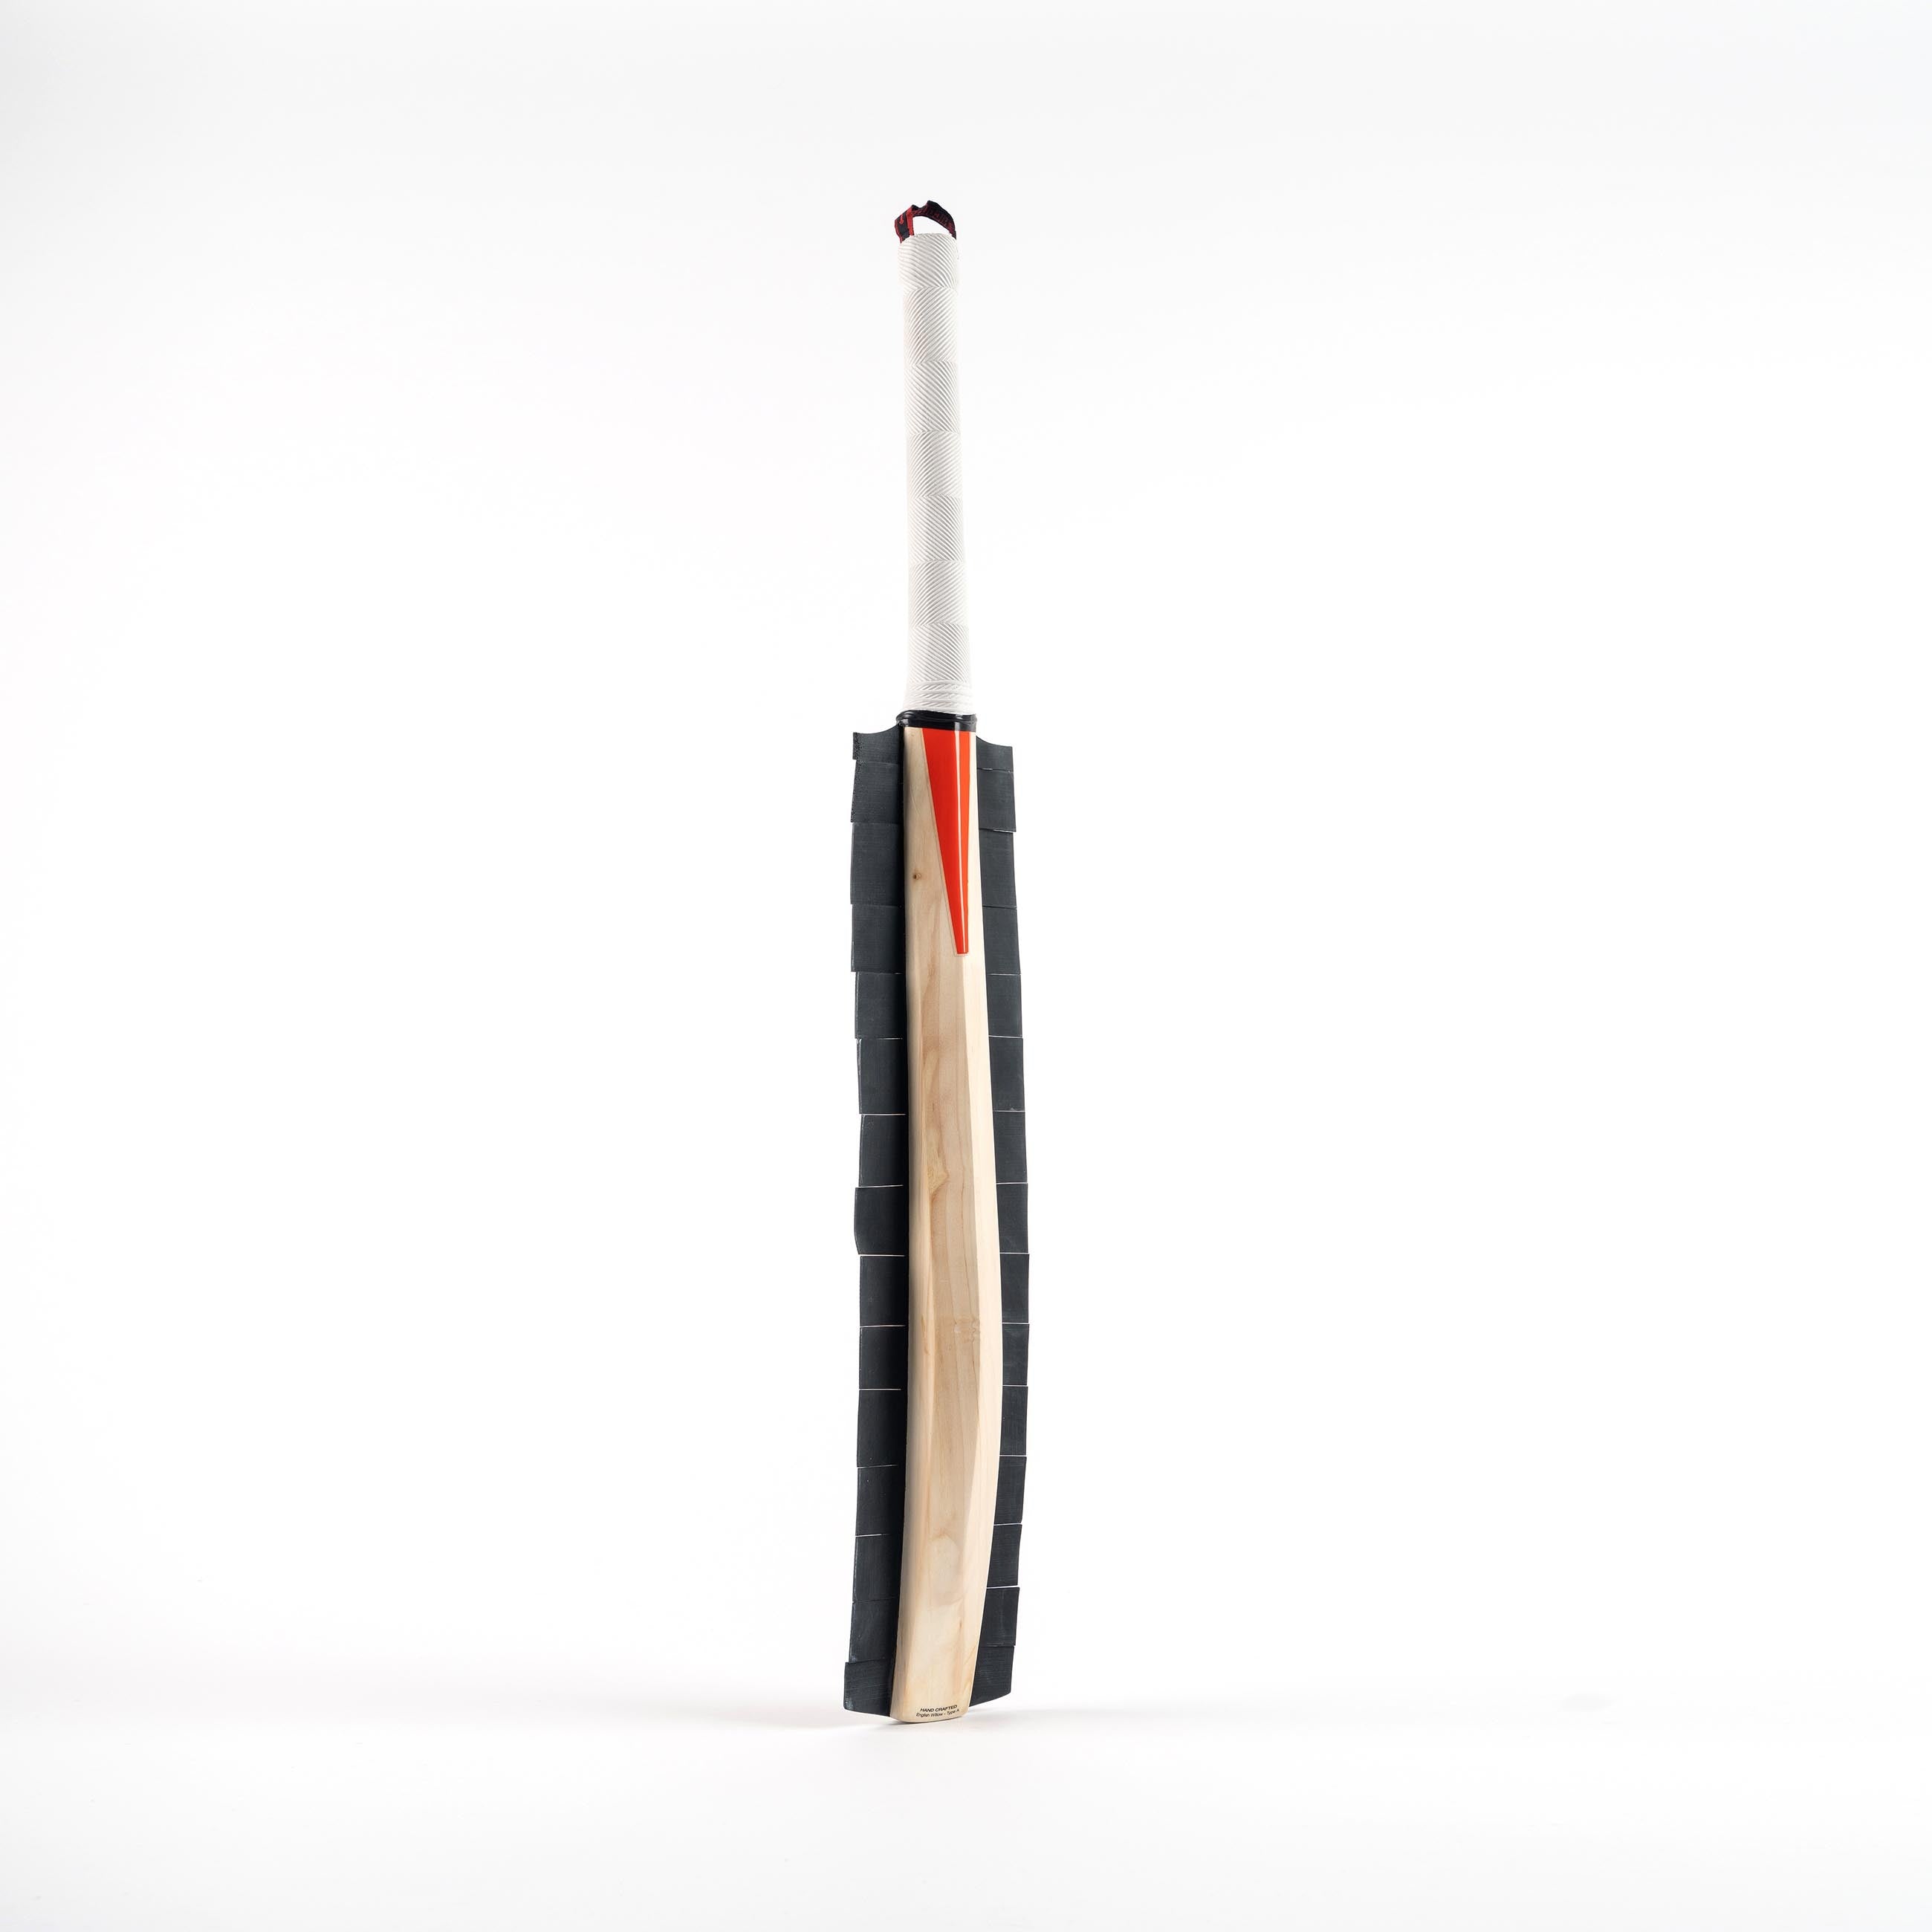 CANA24English Willow Bats Snicko Bat, Spine Right